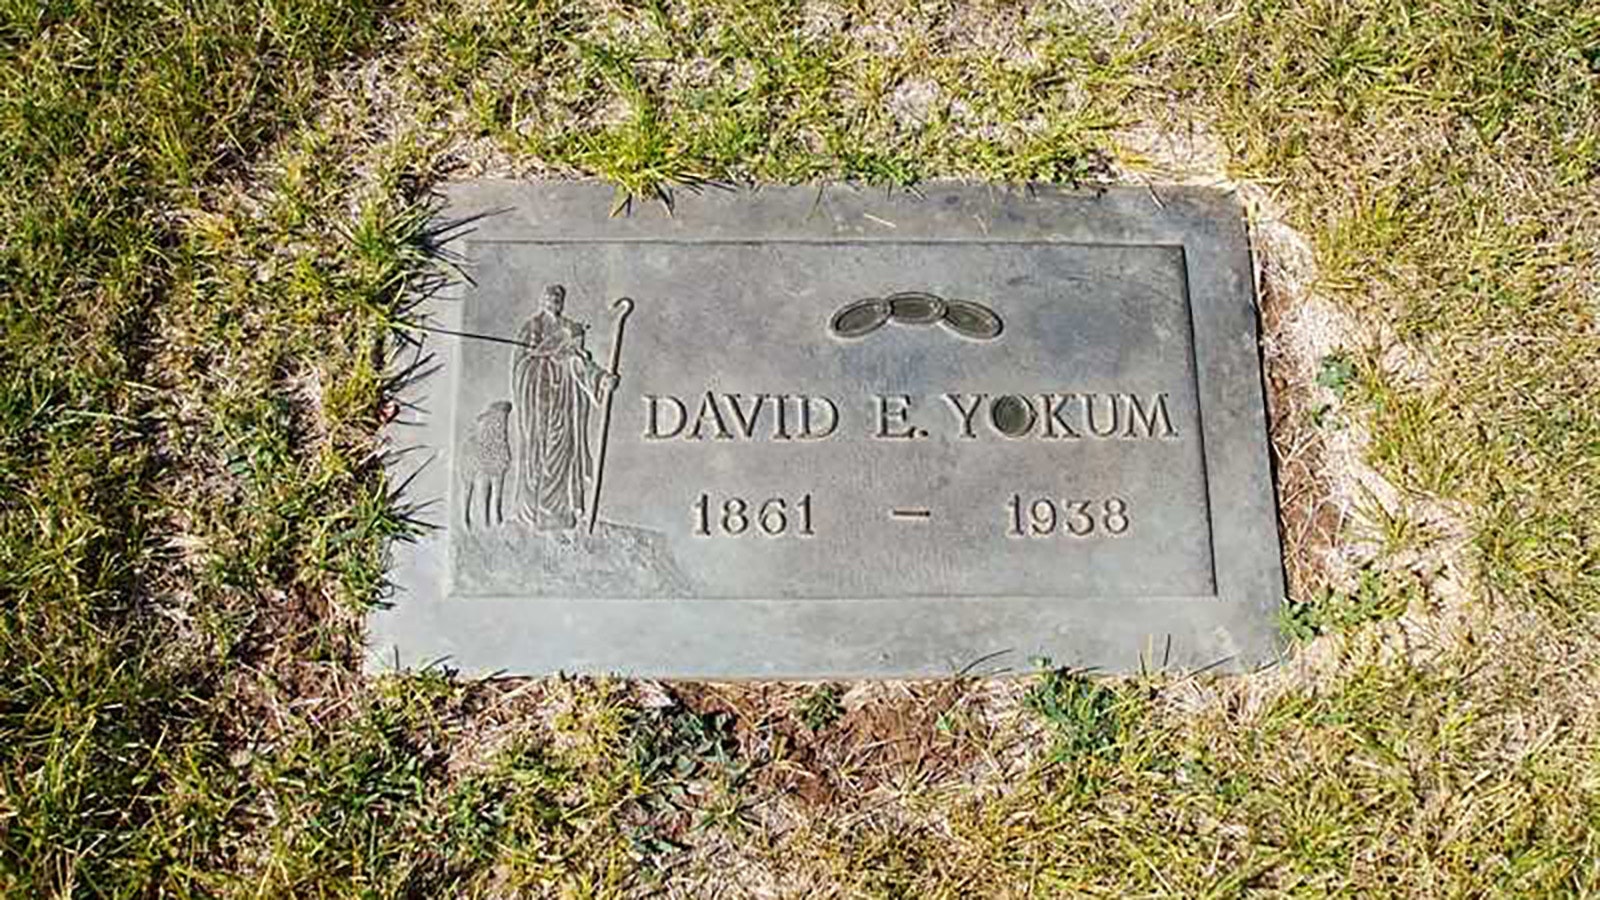 Town Marshal David Yokum served the community in the early years of the Kirby Jail.